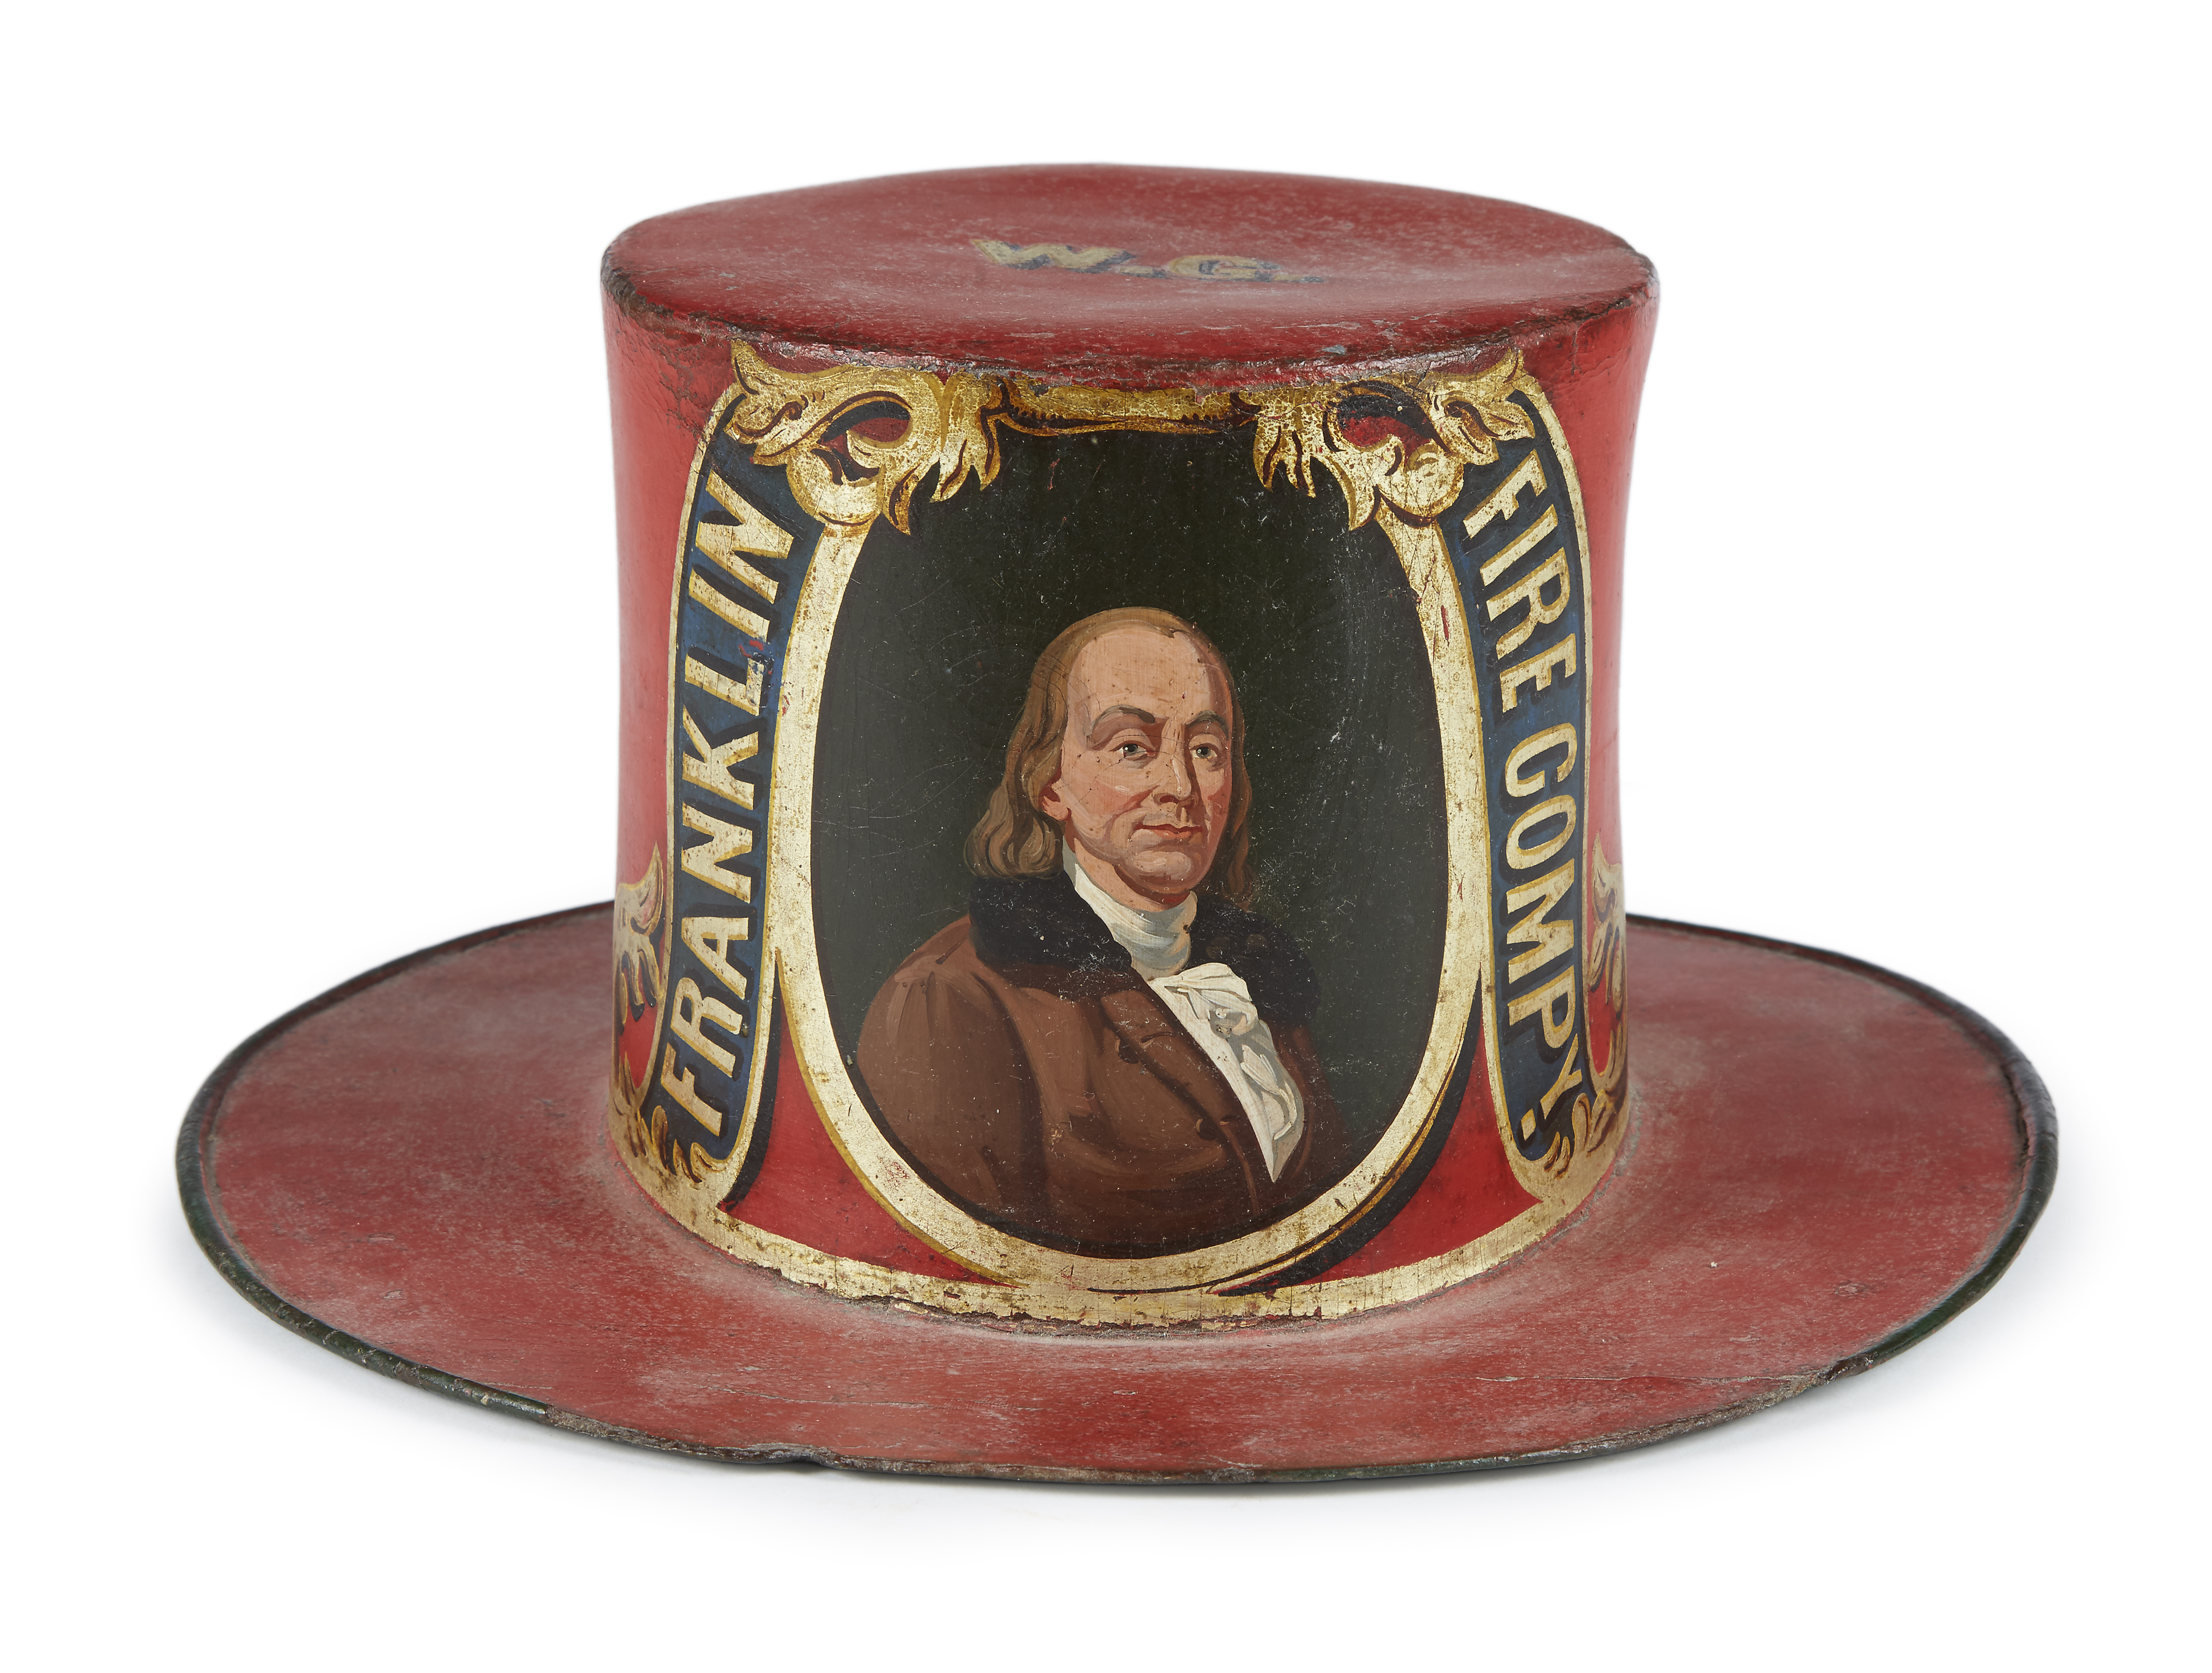 A painted and decorated leather and felt parade hat for the Franklin Fire Company, a volunteer fire-fighting company which was active in Germantown, Philadelphia, Pennsylvania. It dates to between 1840 and 1860, stands six and a half inches tall, and measures a bit over 13 inches in diameter.